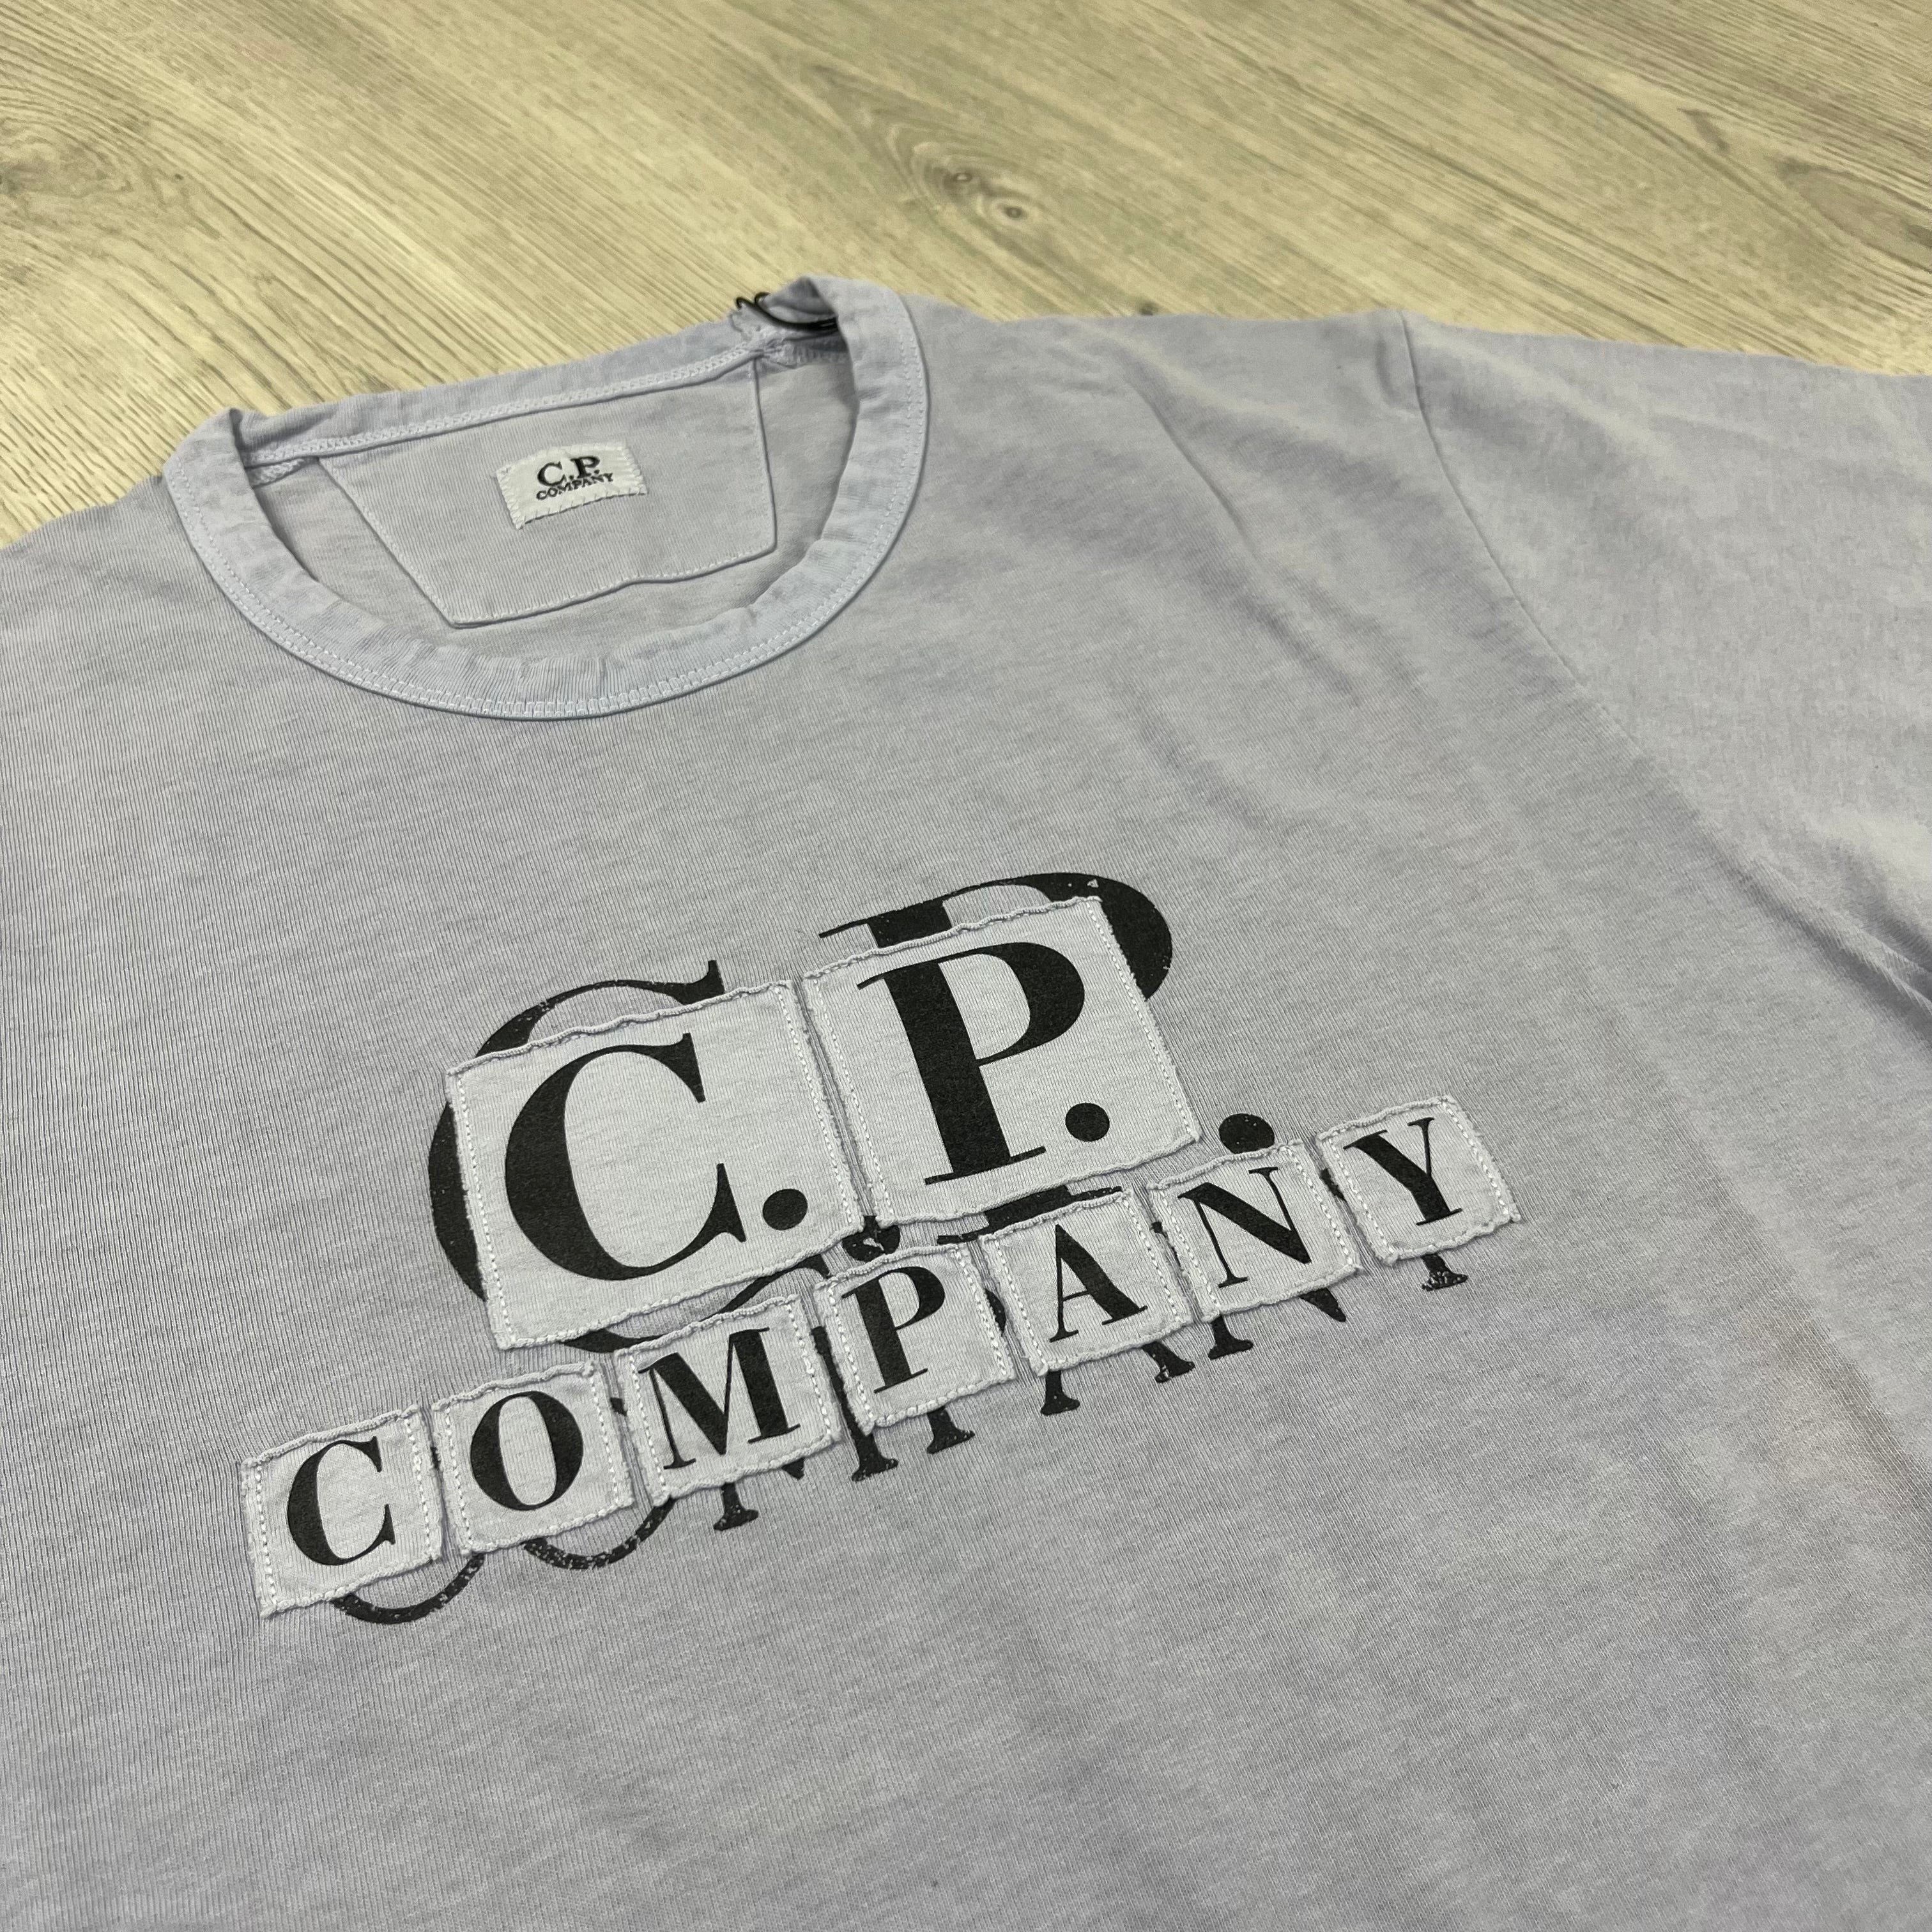 CP Company Patch T-Shirt